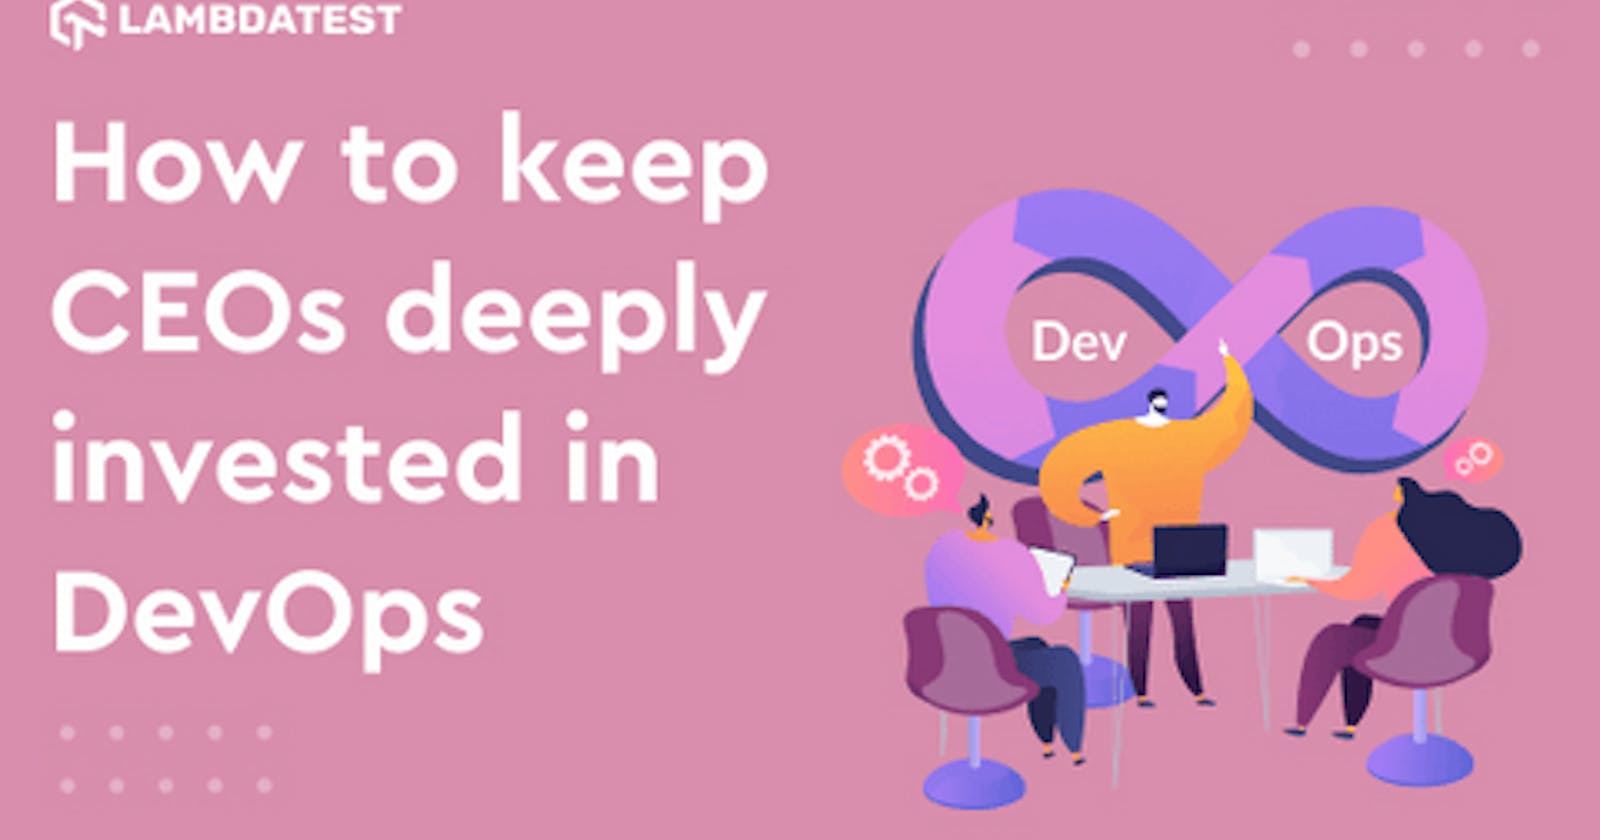 How to keep CEOs deeply invested in DevOps